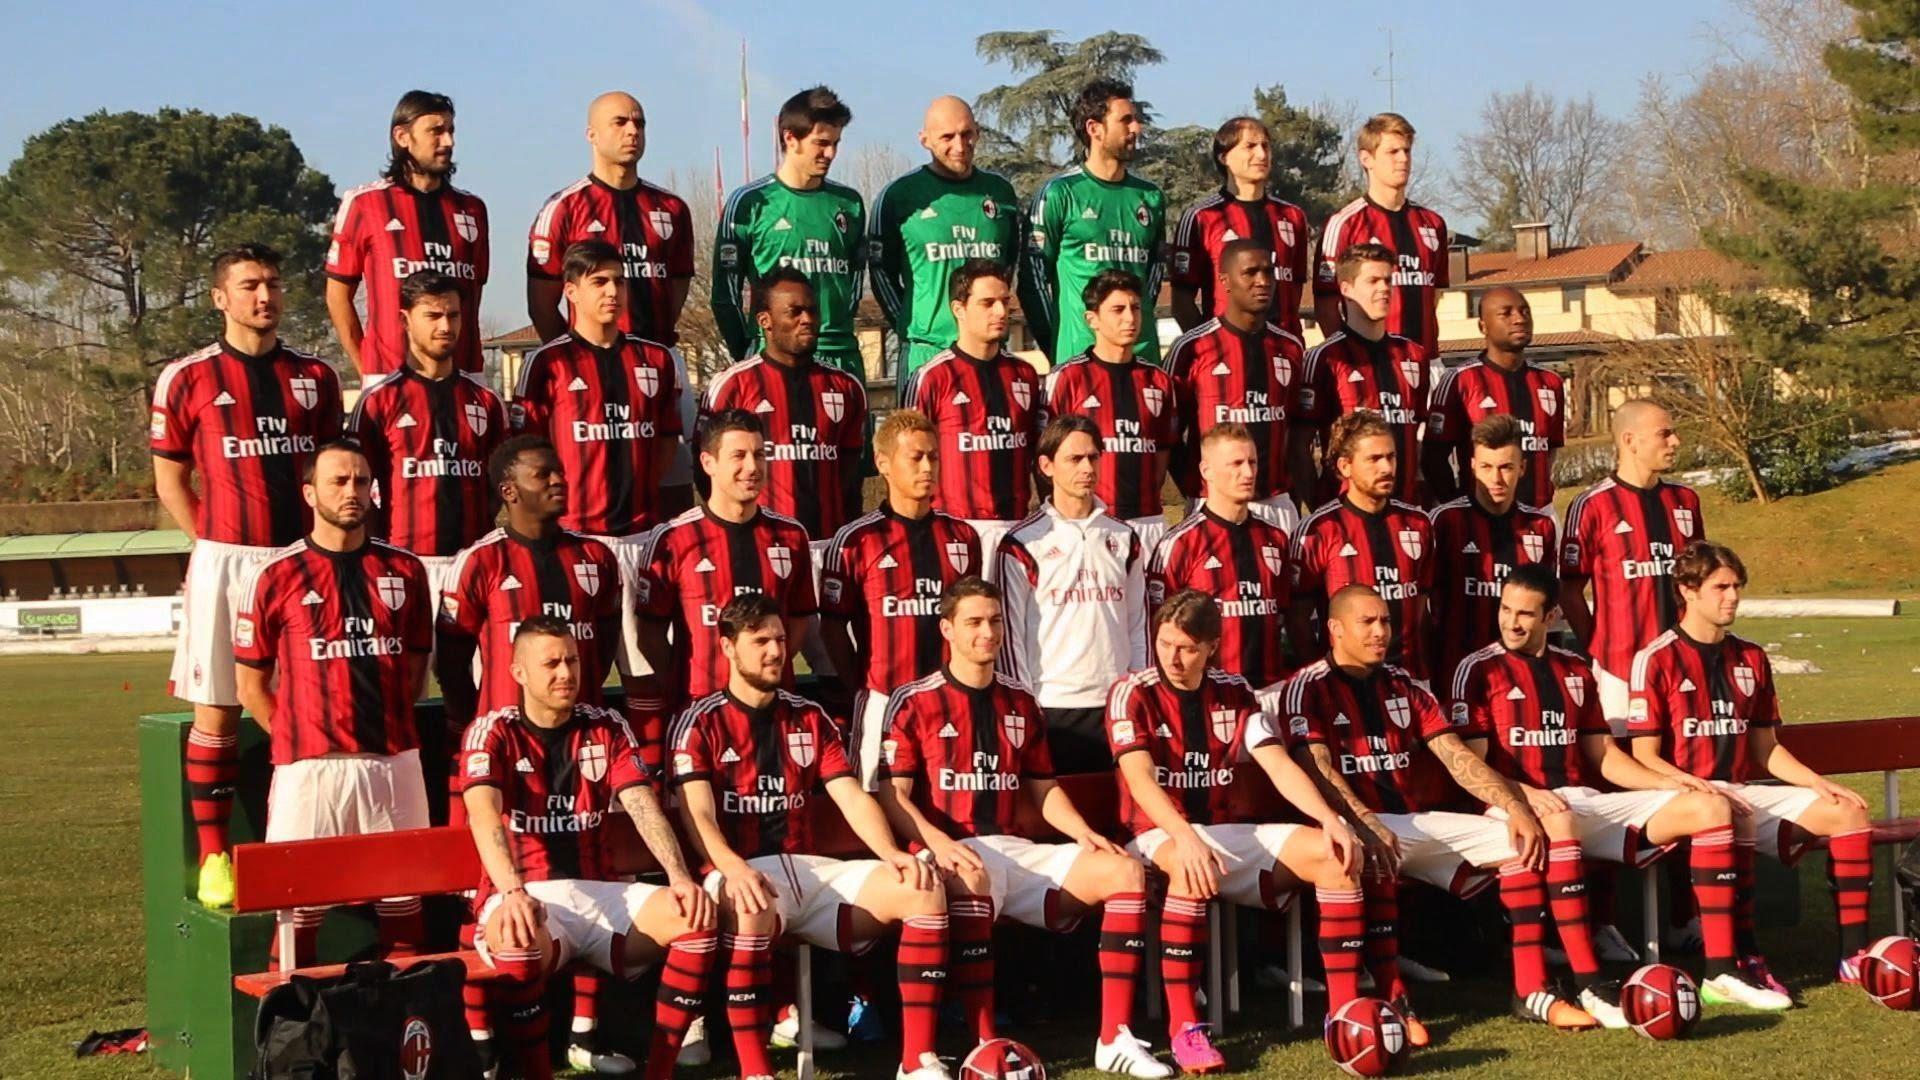 Video: The Behind The Scenes Of The Milan 2014 15 Team Photo Shoot